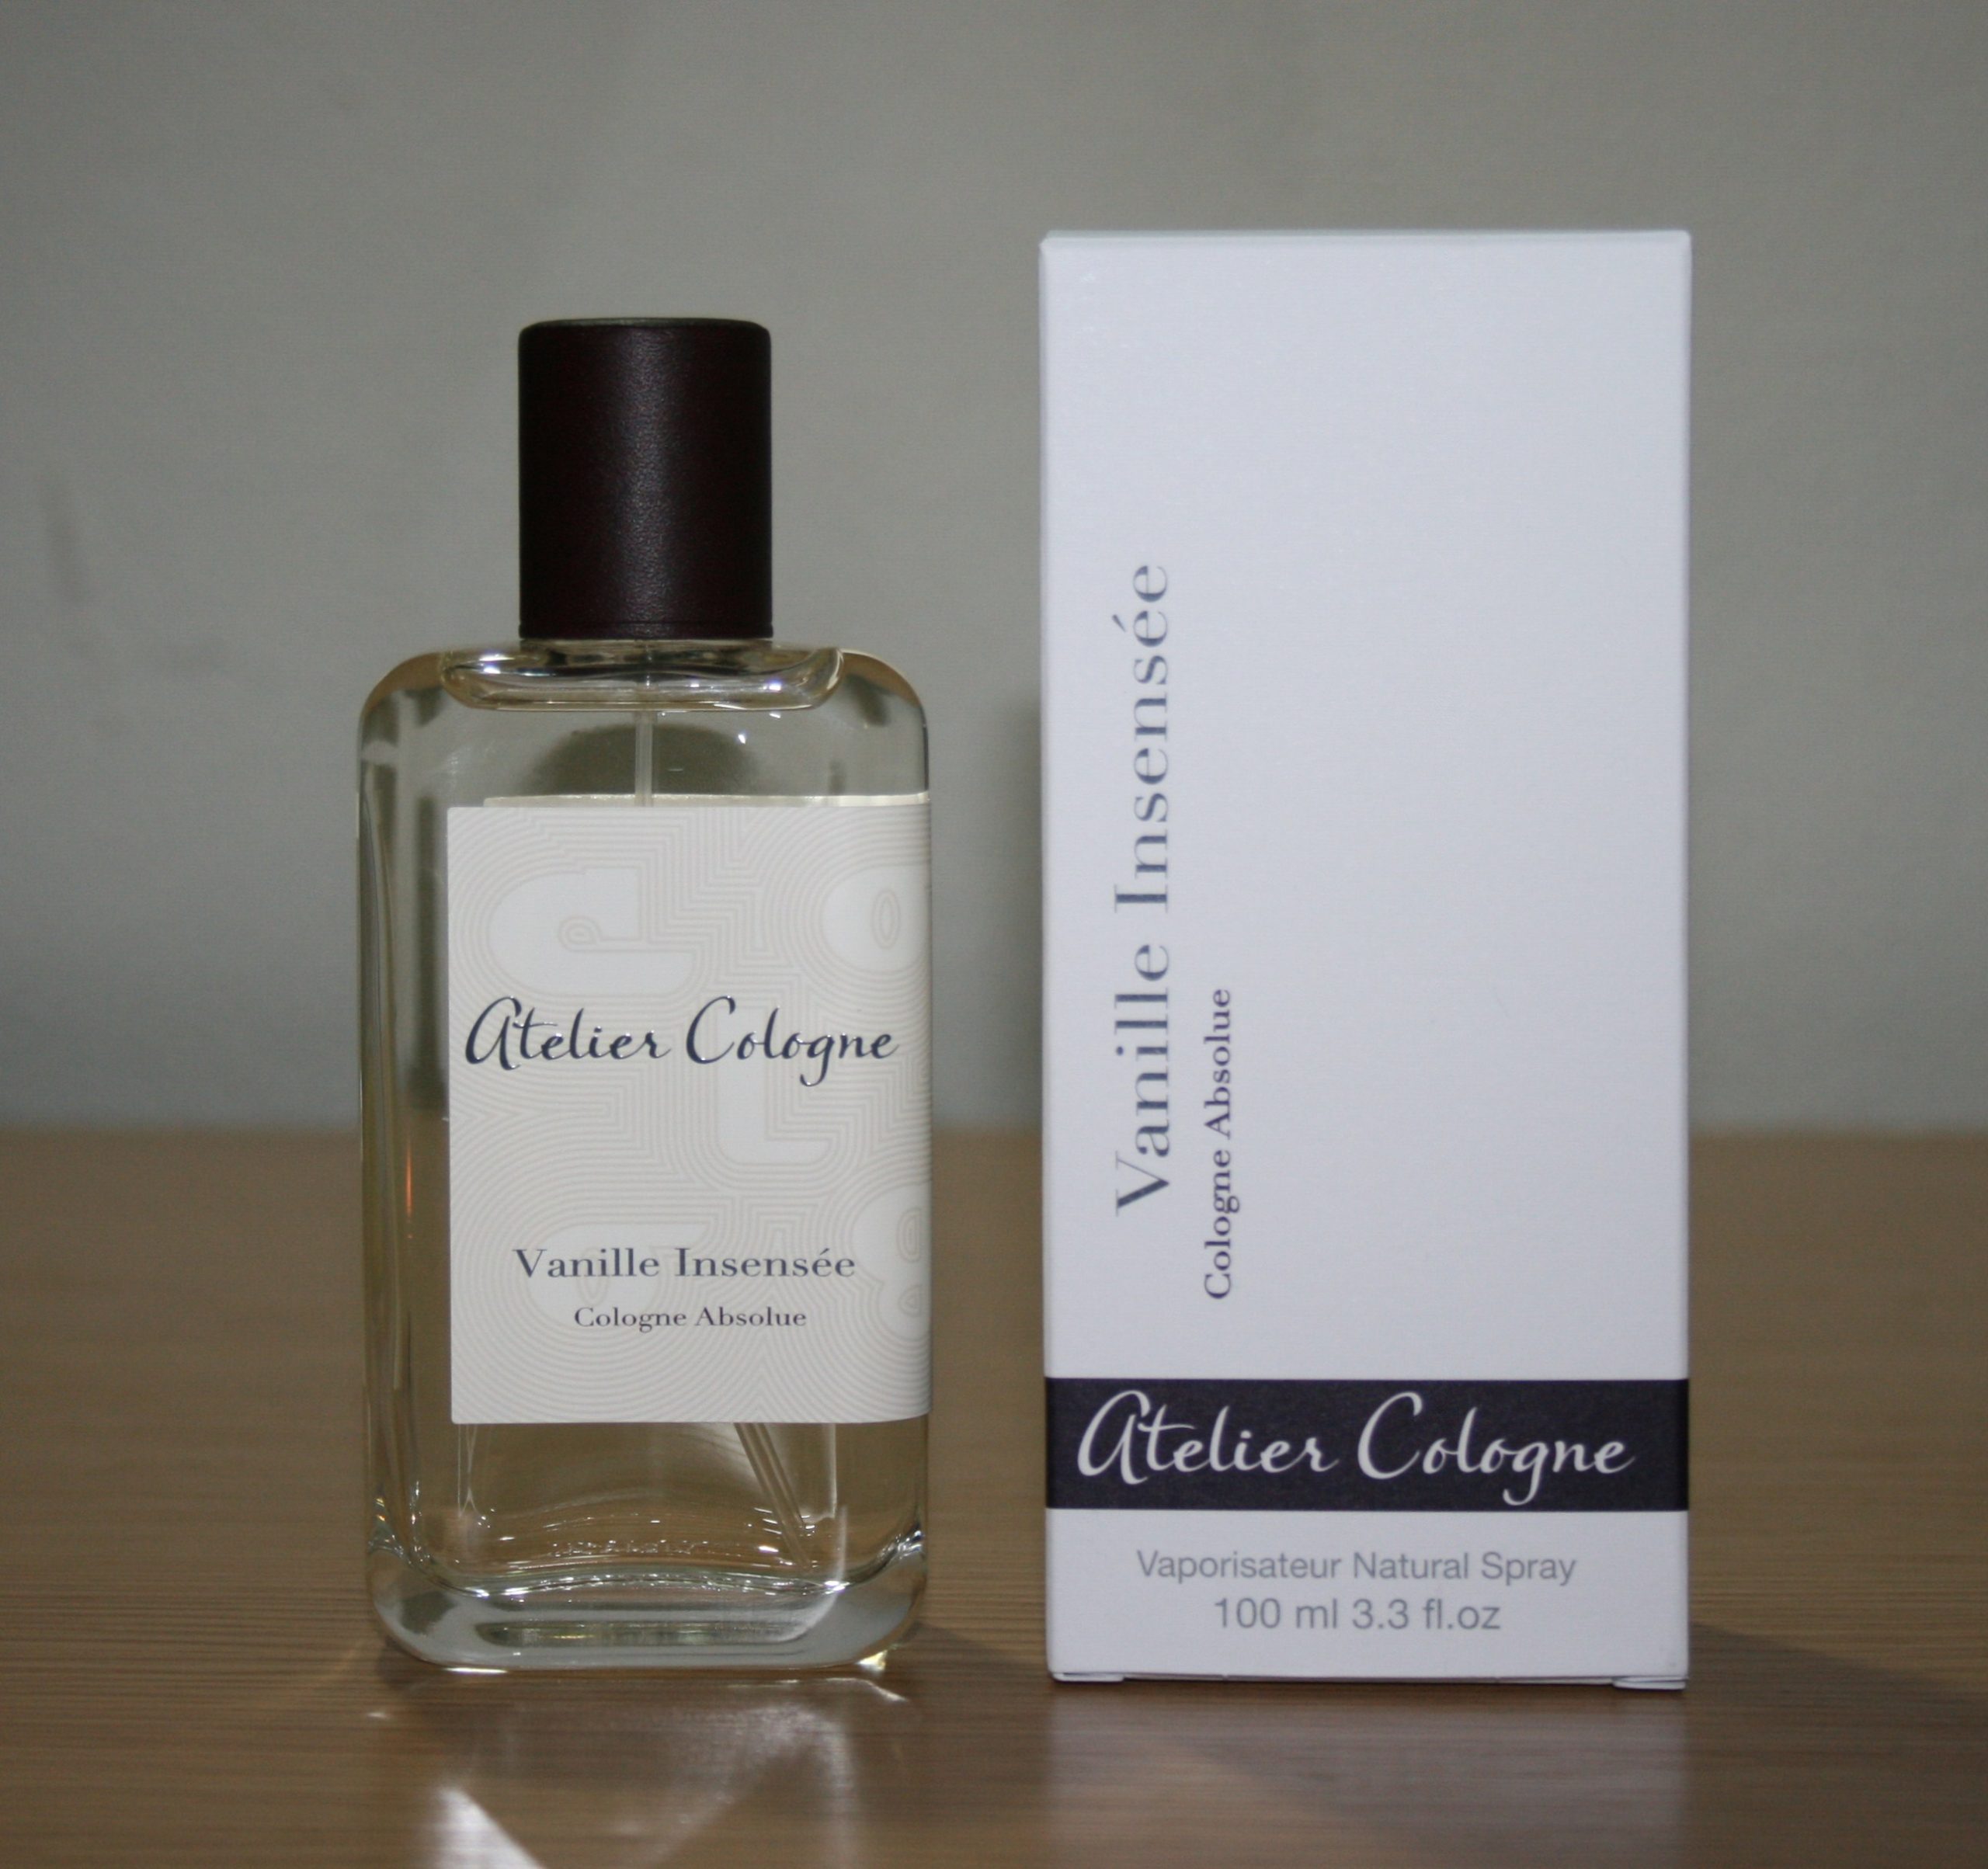 Fragrance Friday: Atelier Cologne’s Vanille Insensée Cologne Absolue